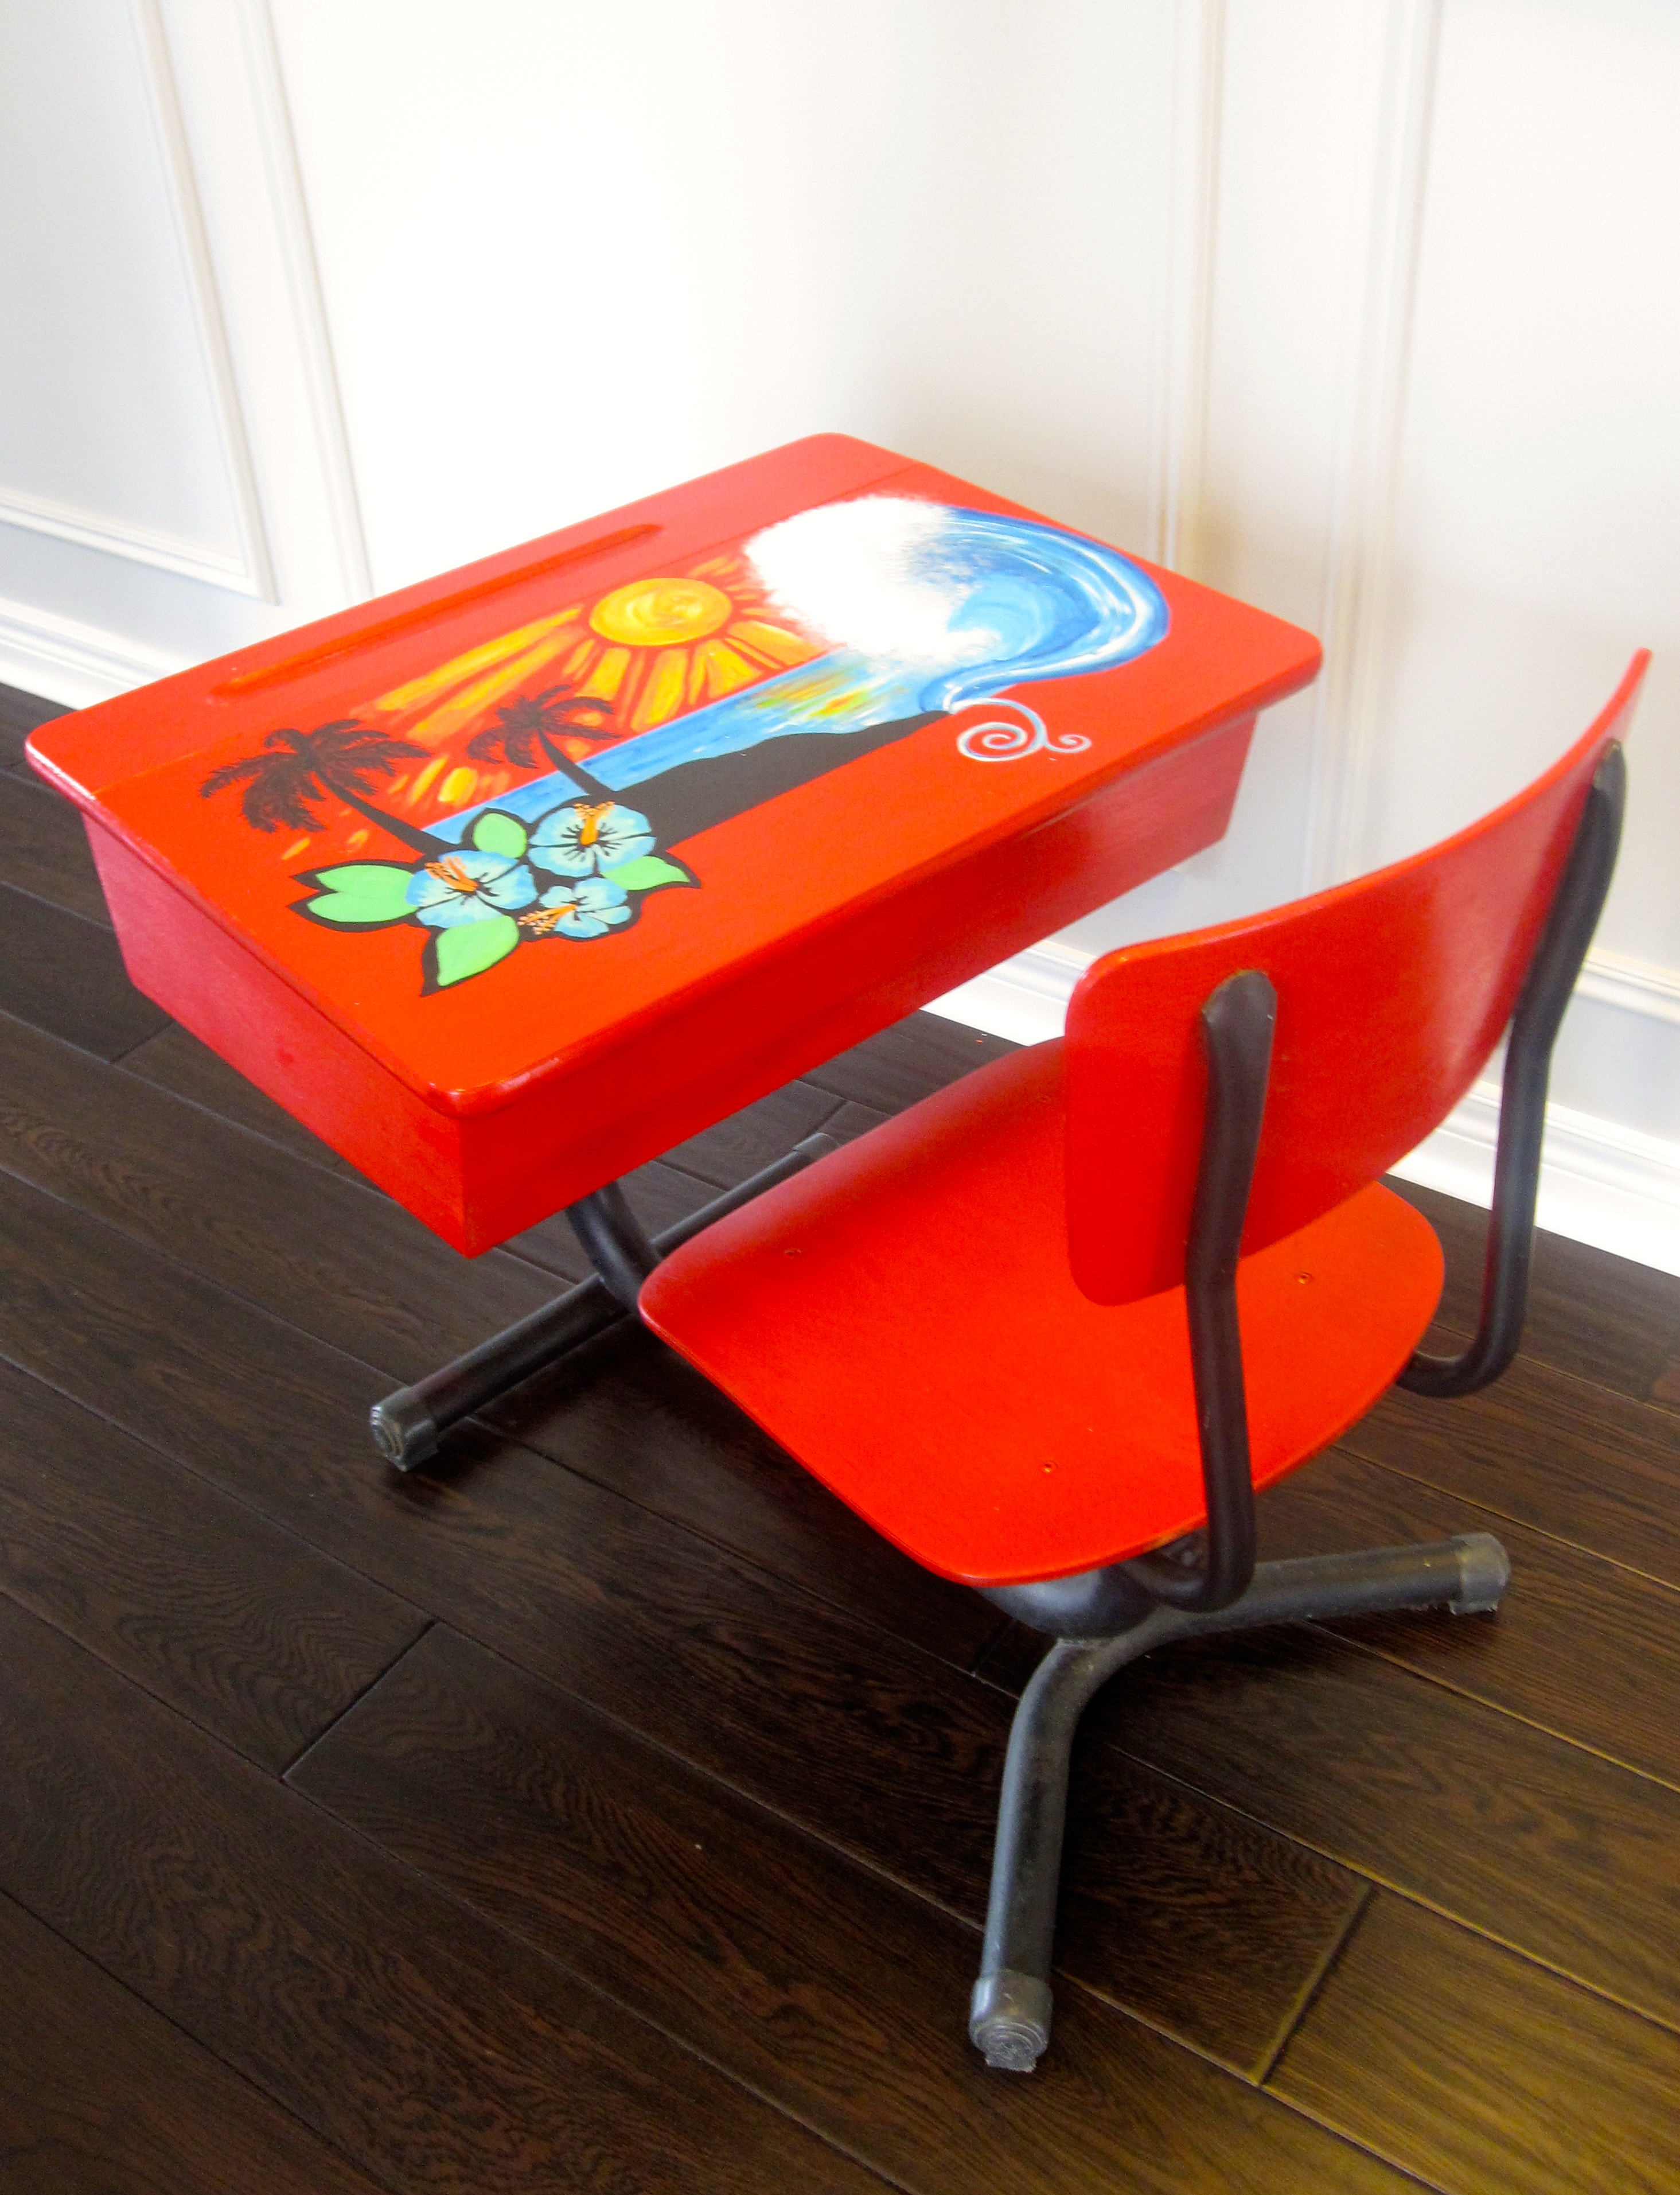 An Old School Desk Is Given A Fresh Surf Look With A Hand Painted